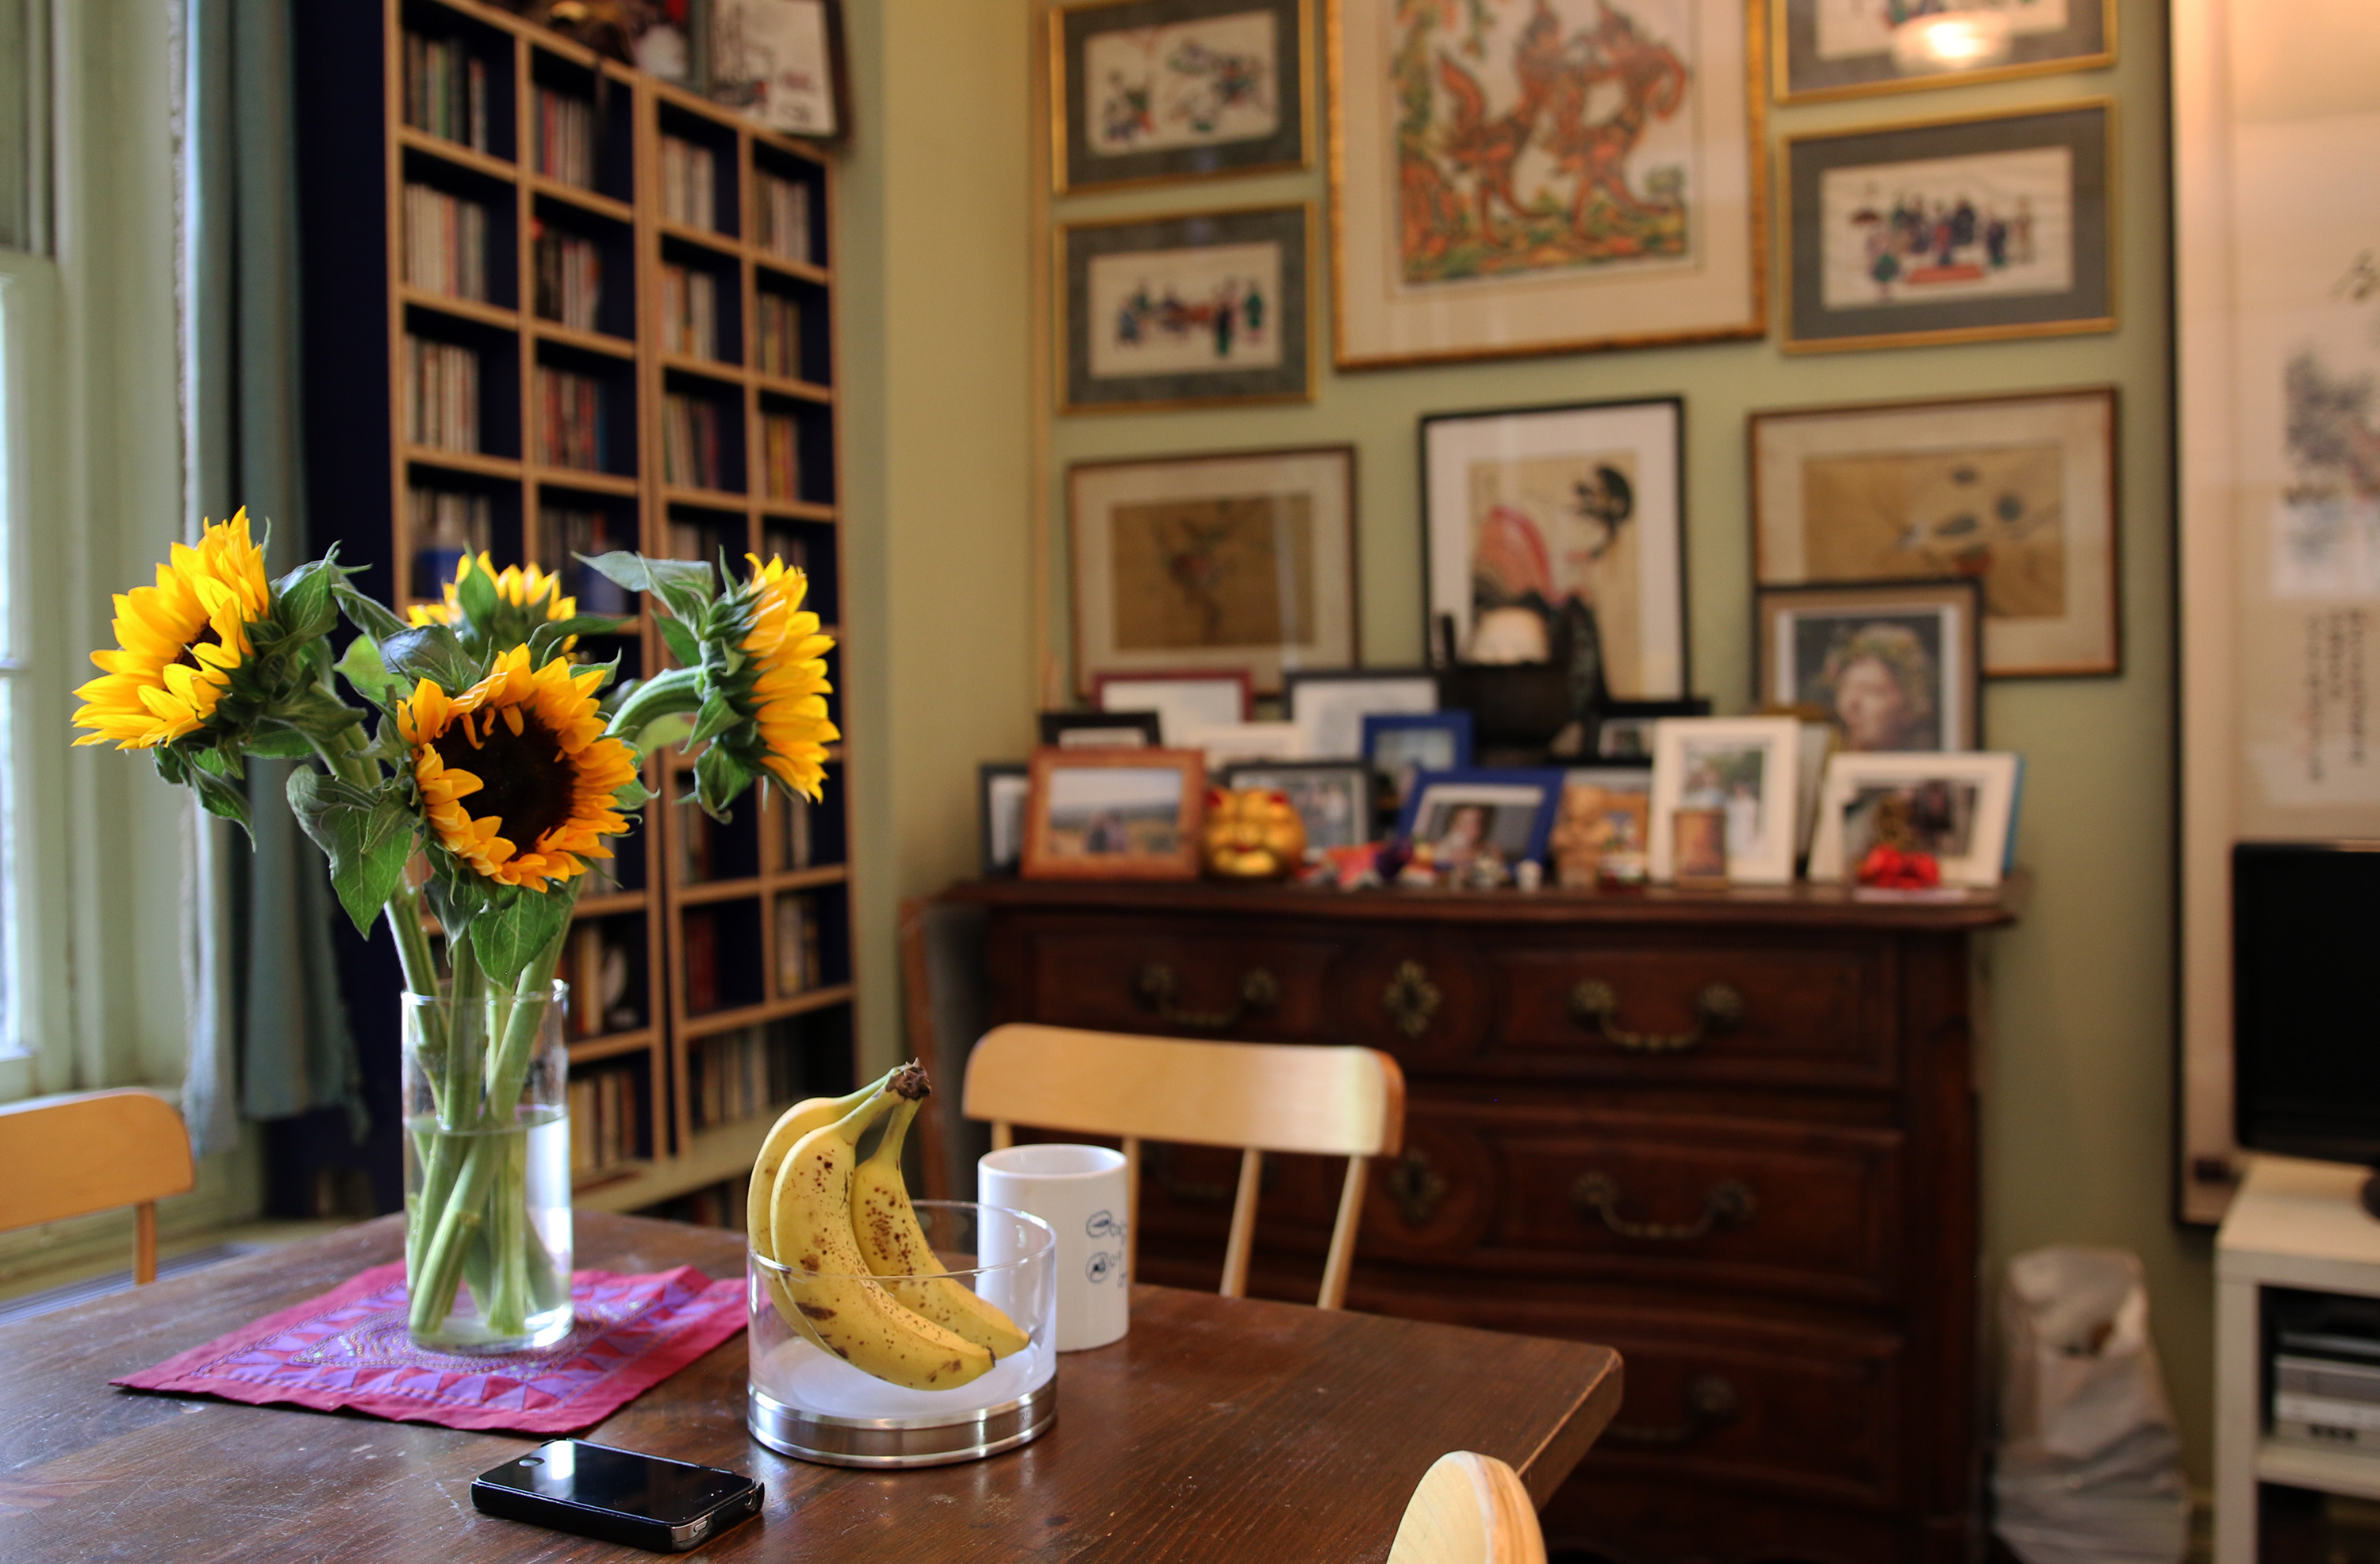 John King's kitchen. A table with flowers and some bananas, a bookcase, and a wall filled with framed photographs.